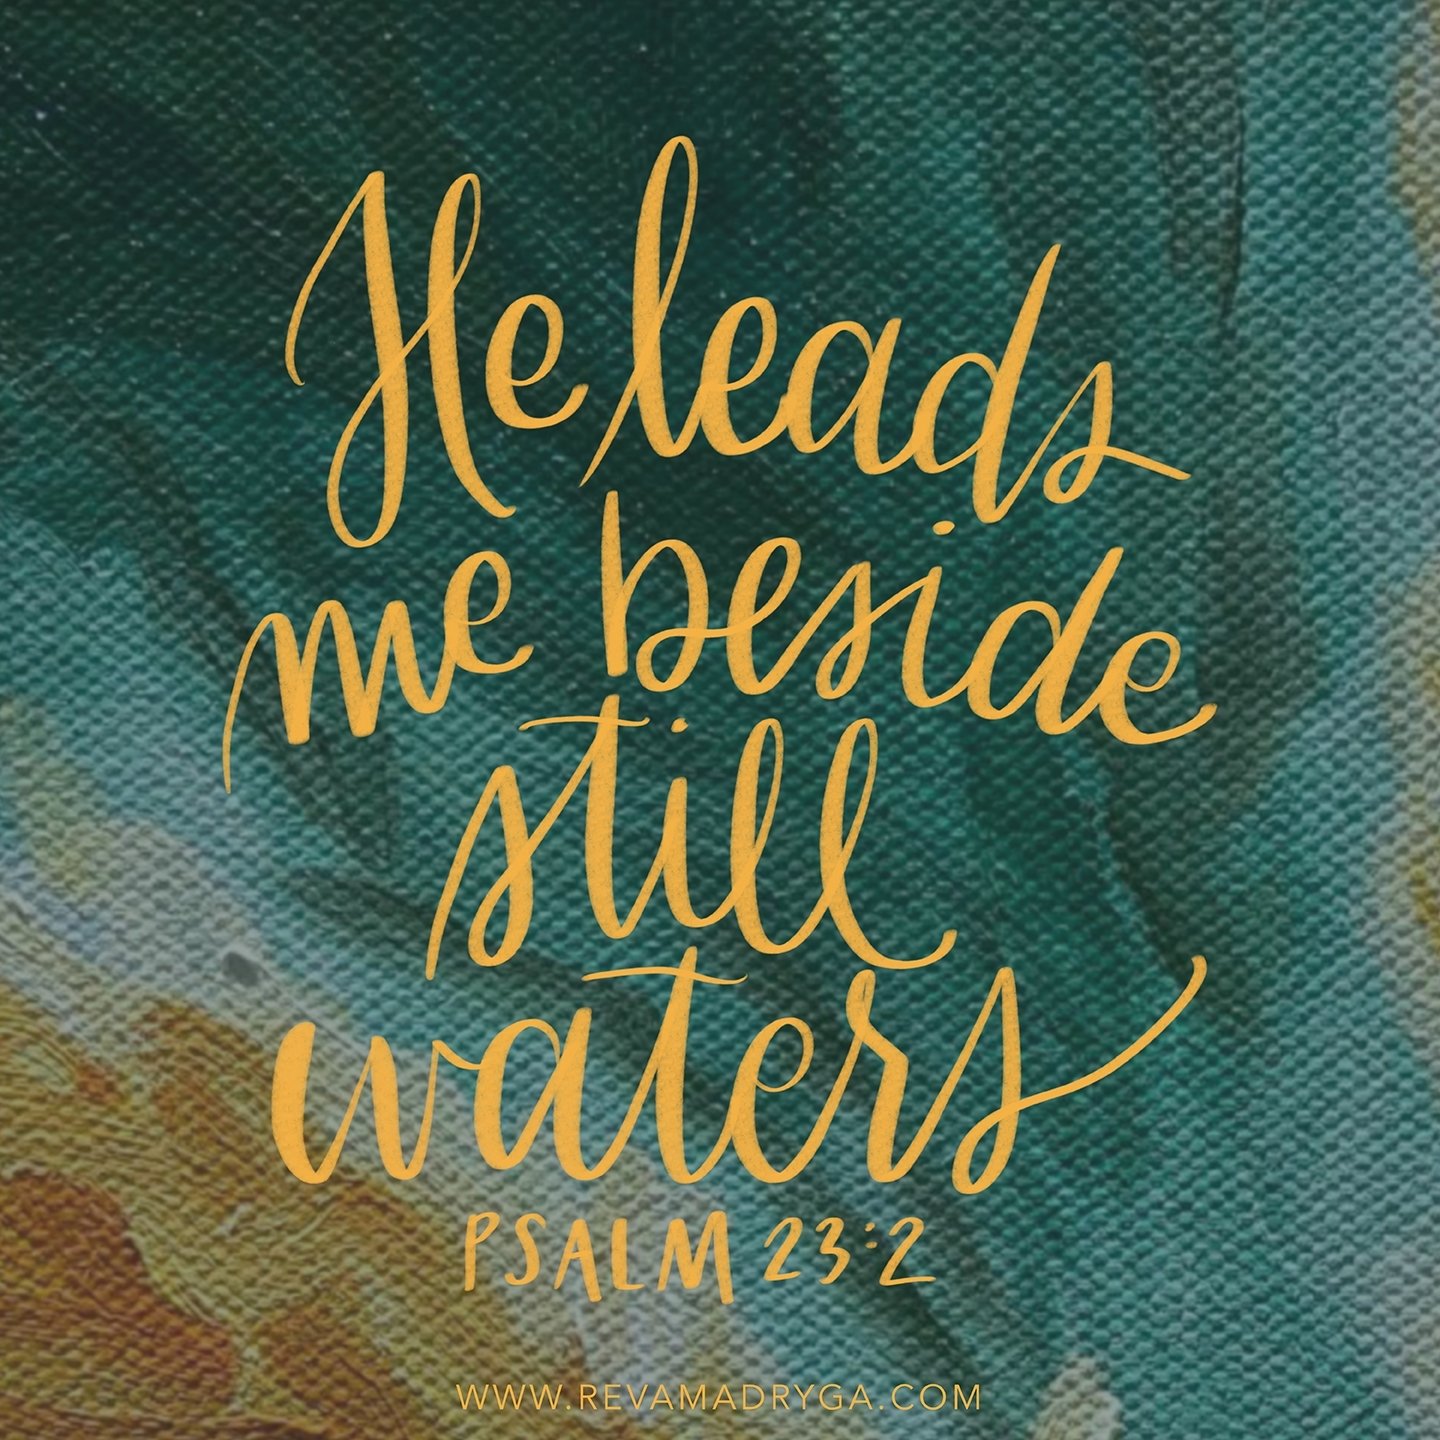 He makes me lie down in green pastures.
He leads me beside still waters.

Psalm 23:2